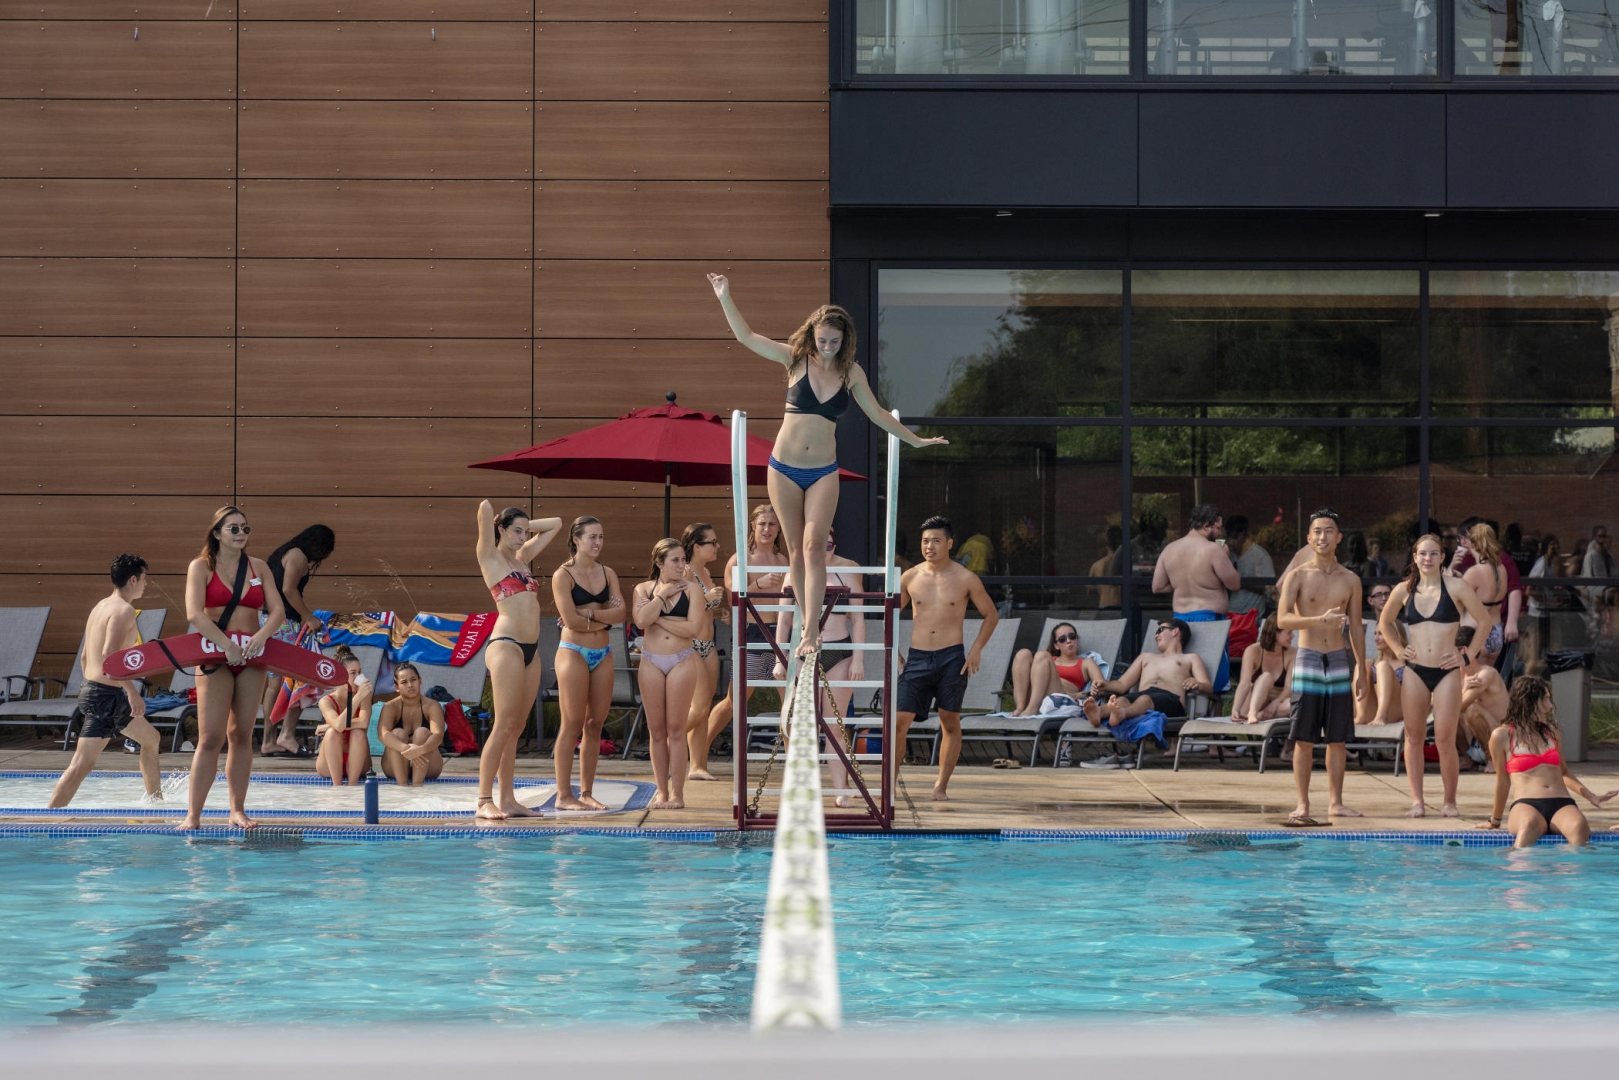 A student balances on a slackline that's crossing a pool as a group of students watches.